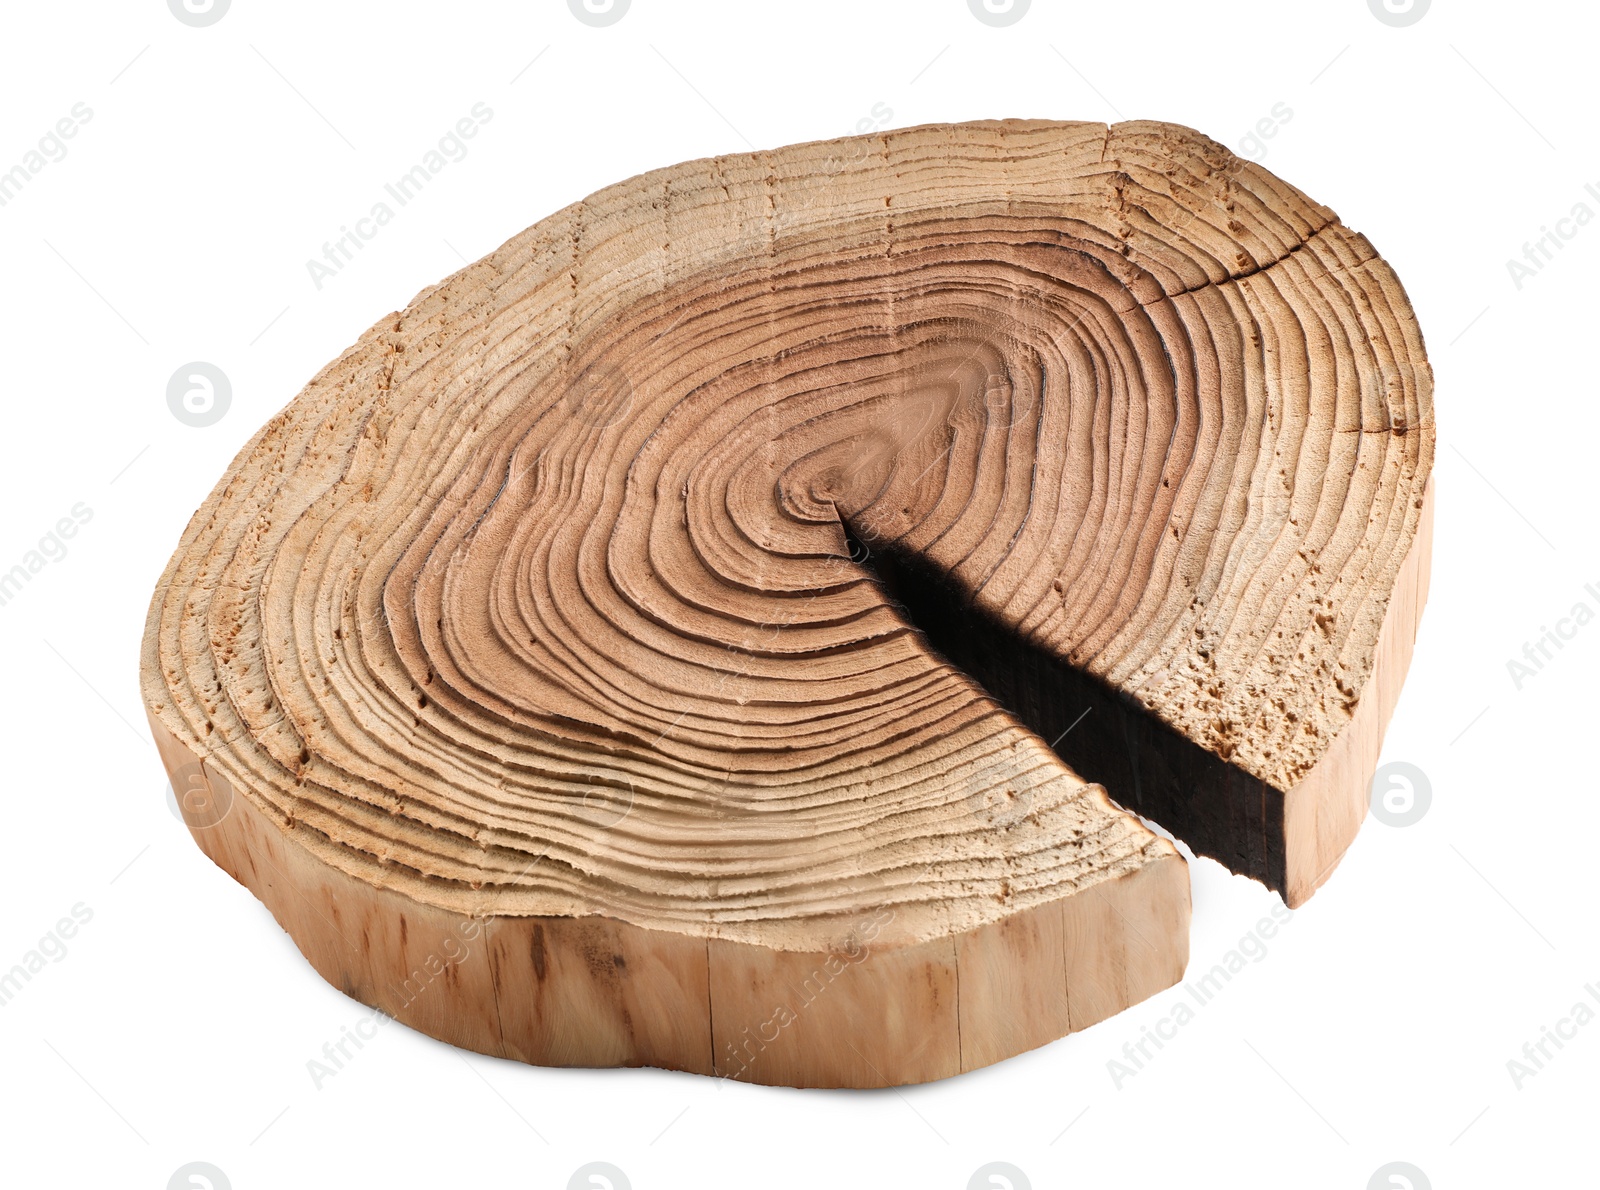 Photo of Cracked tree stump as decorative stand isolated on white